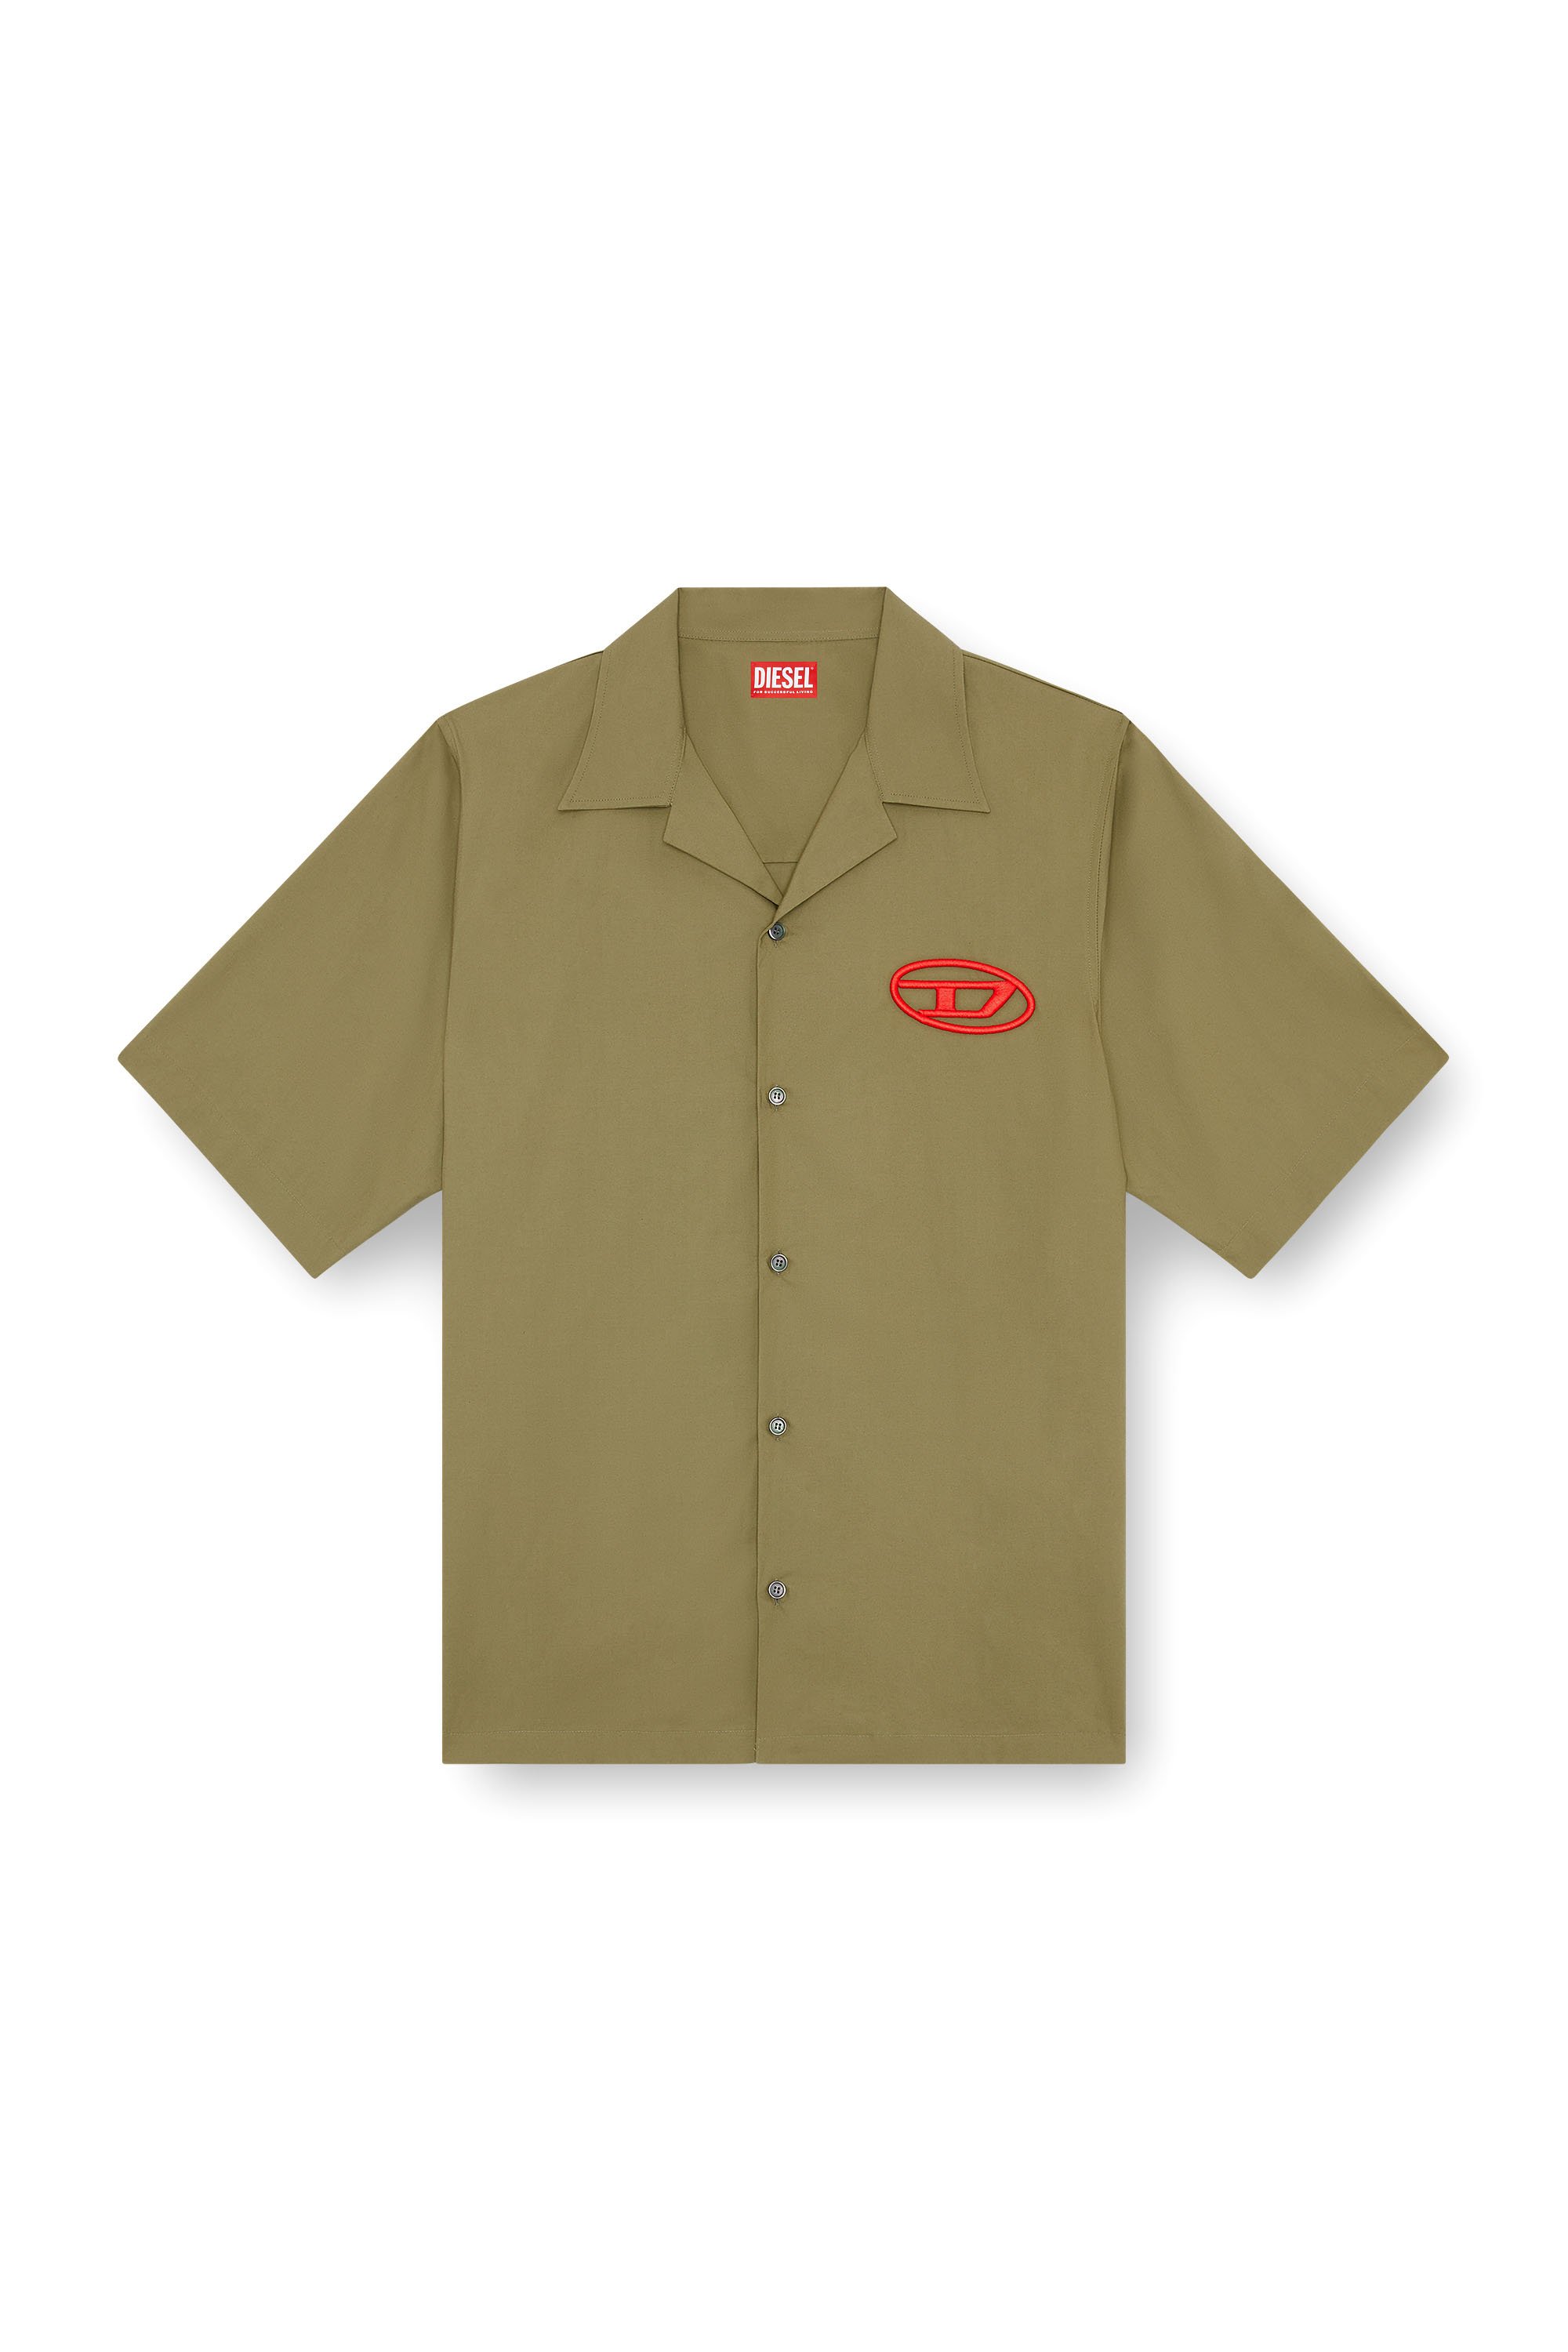 Diesel - S-MAC-C, Man Bowling shirt with logo embroidery in Green - Image 3